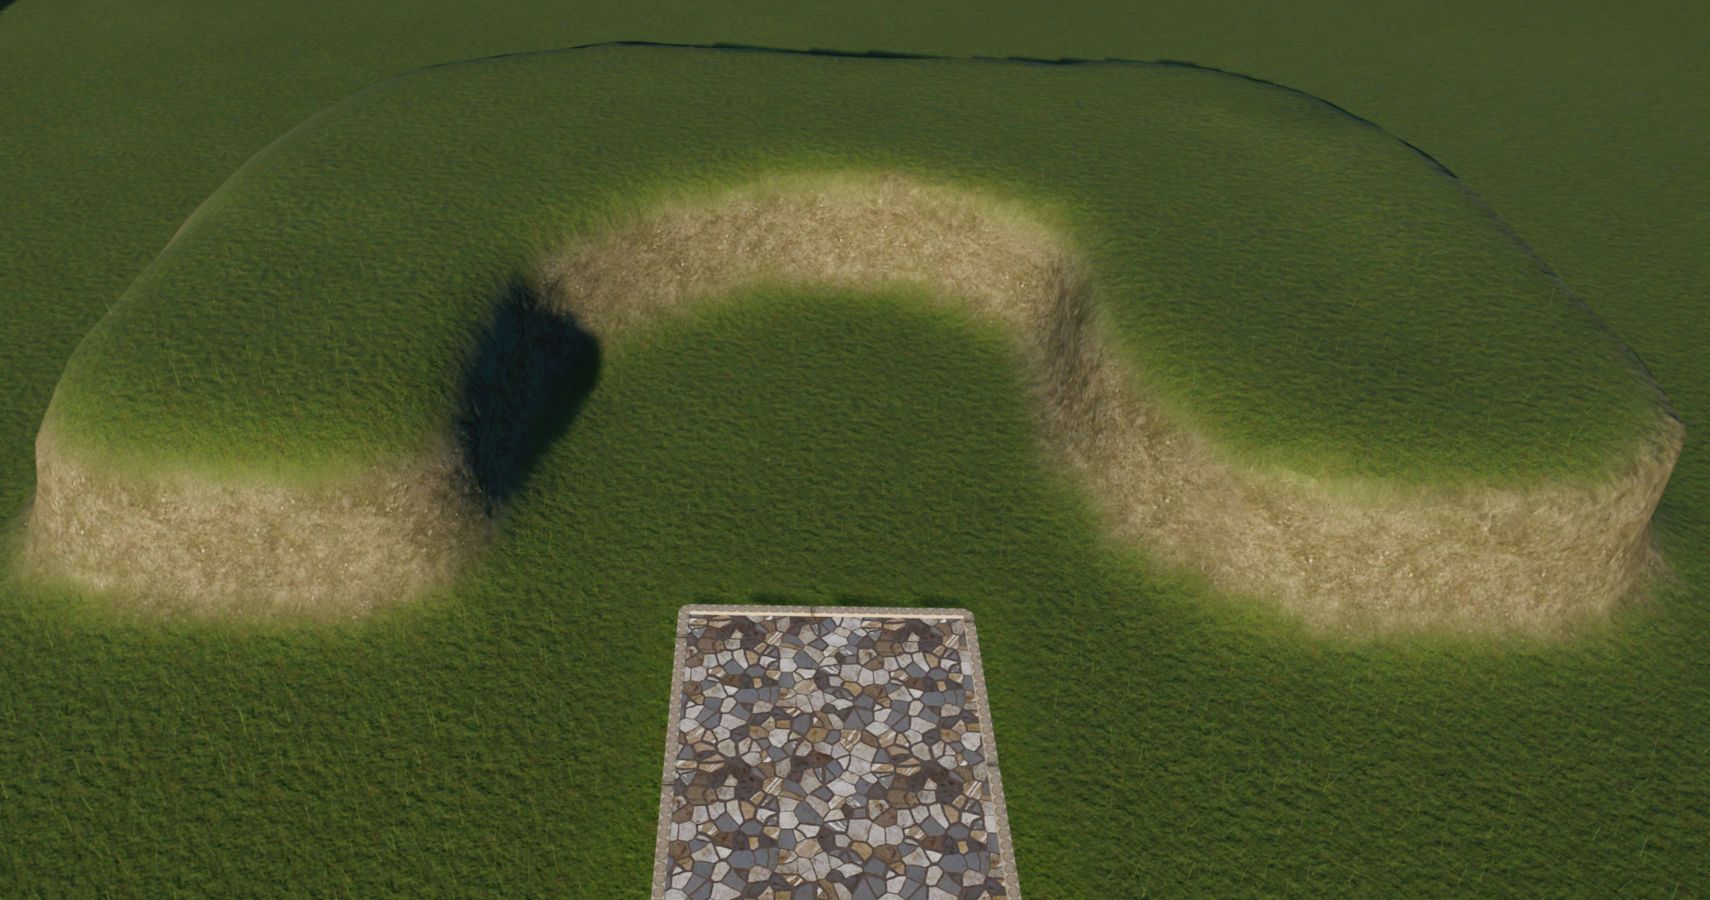 Planet zoo raised terrain in horseshoe shape with path down the centre.